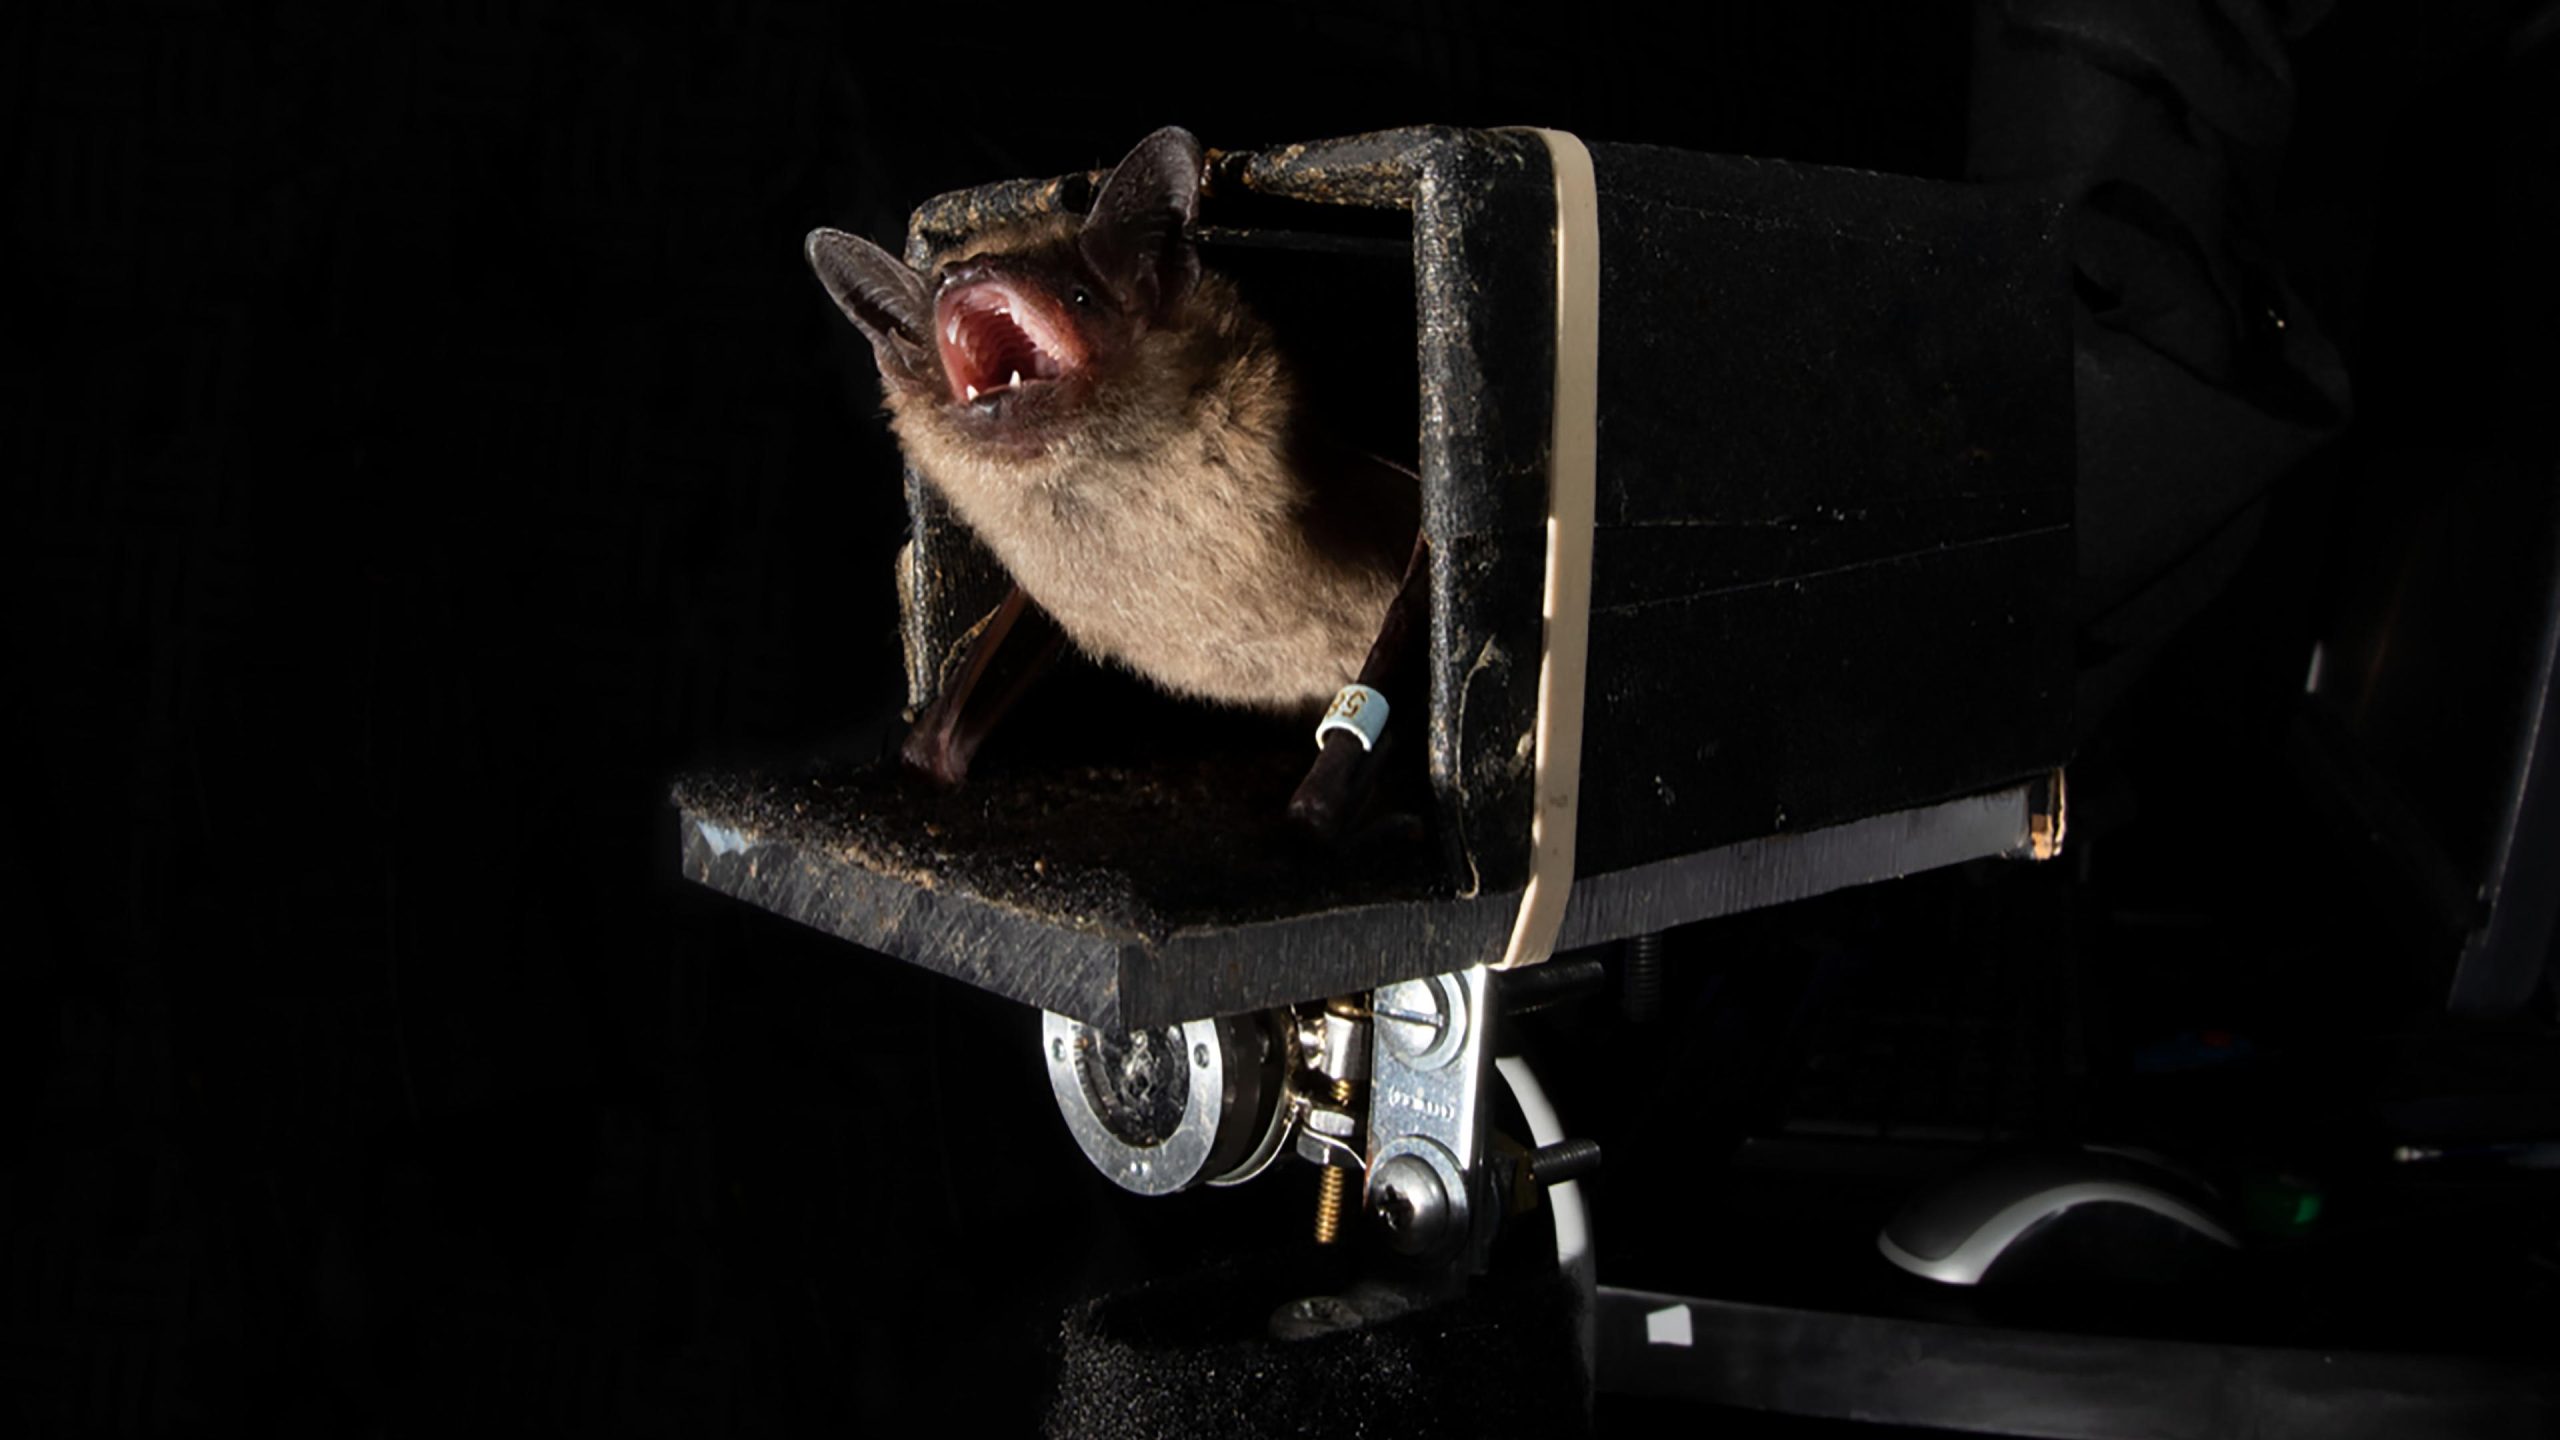 Advanced Echolocation: Bats Use Echoes Own Vocalizations To Anticipate Location, Trajectory of Prey